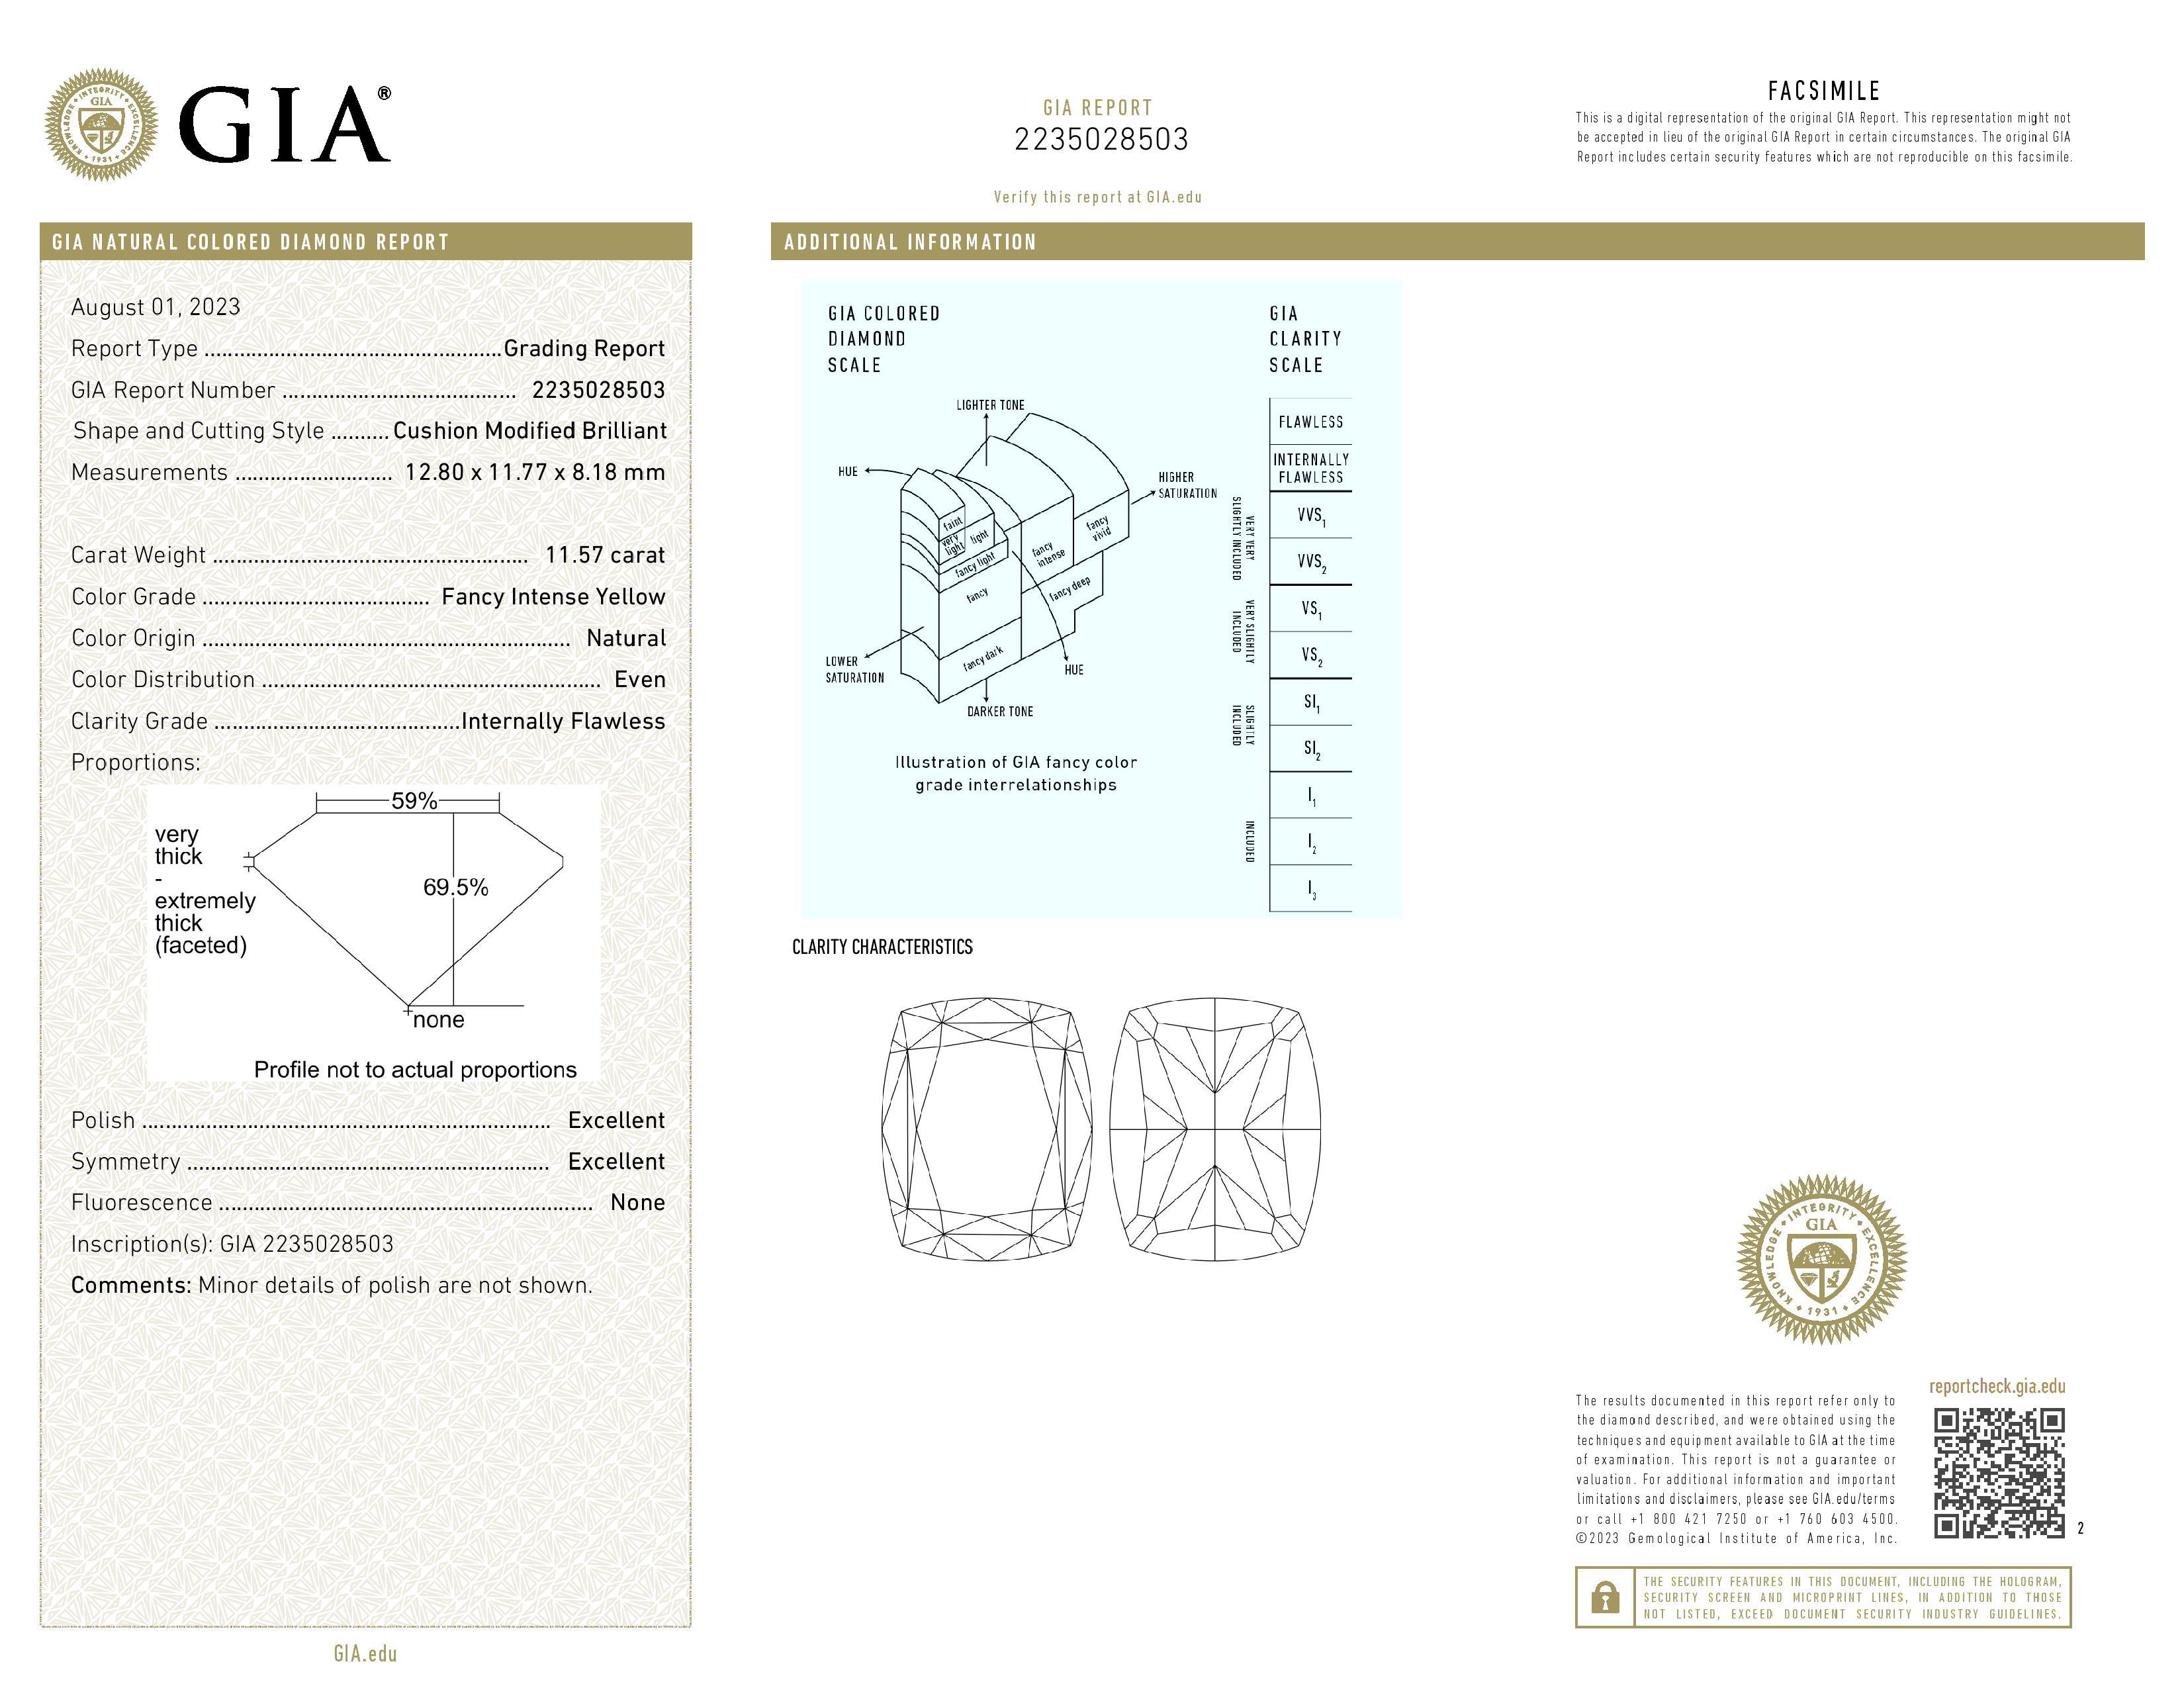 An exquisite 11.57 investment grade diamond certified by GIA. The cushion cut diamond is Internally Flawless clarity, excellent polish, excellent symmetry and no fluorescence.

We can custom design as per your request, additional fees may apply